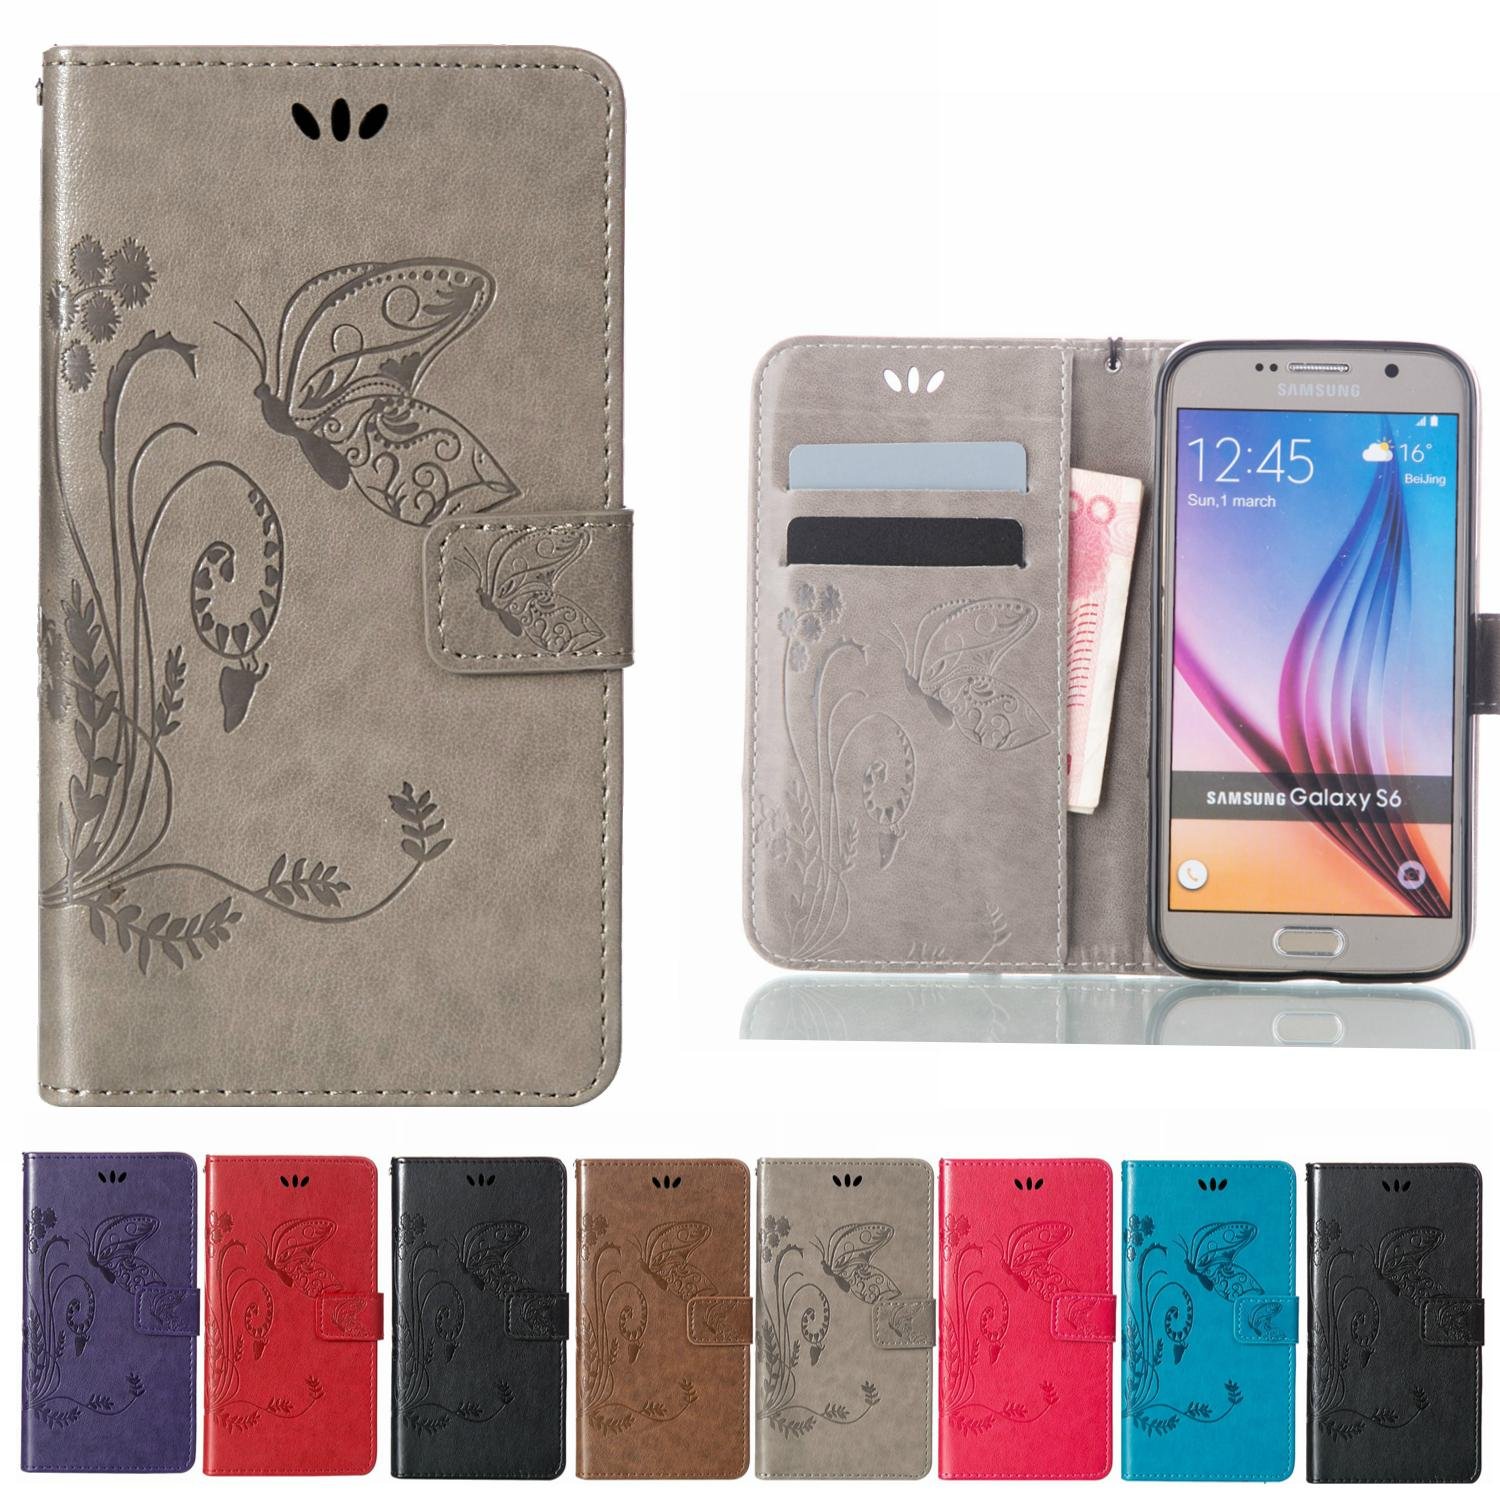 Leather Wallet Case For Samsung Galaxy S7 Edge S6 S8 Plus S5 Neo J7 J1 Mini  A5  4